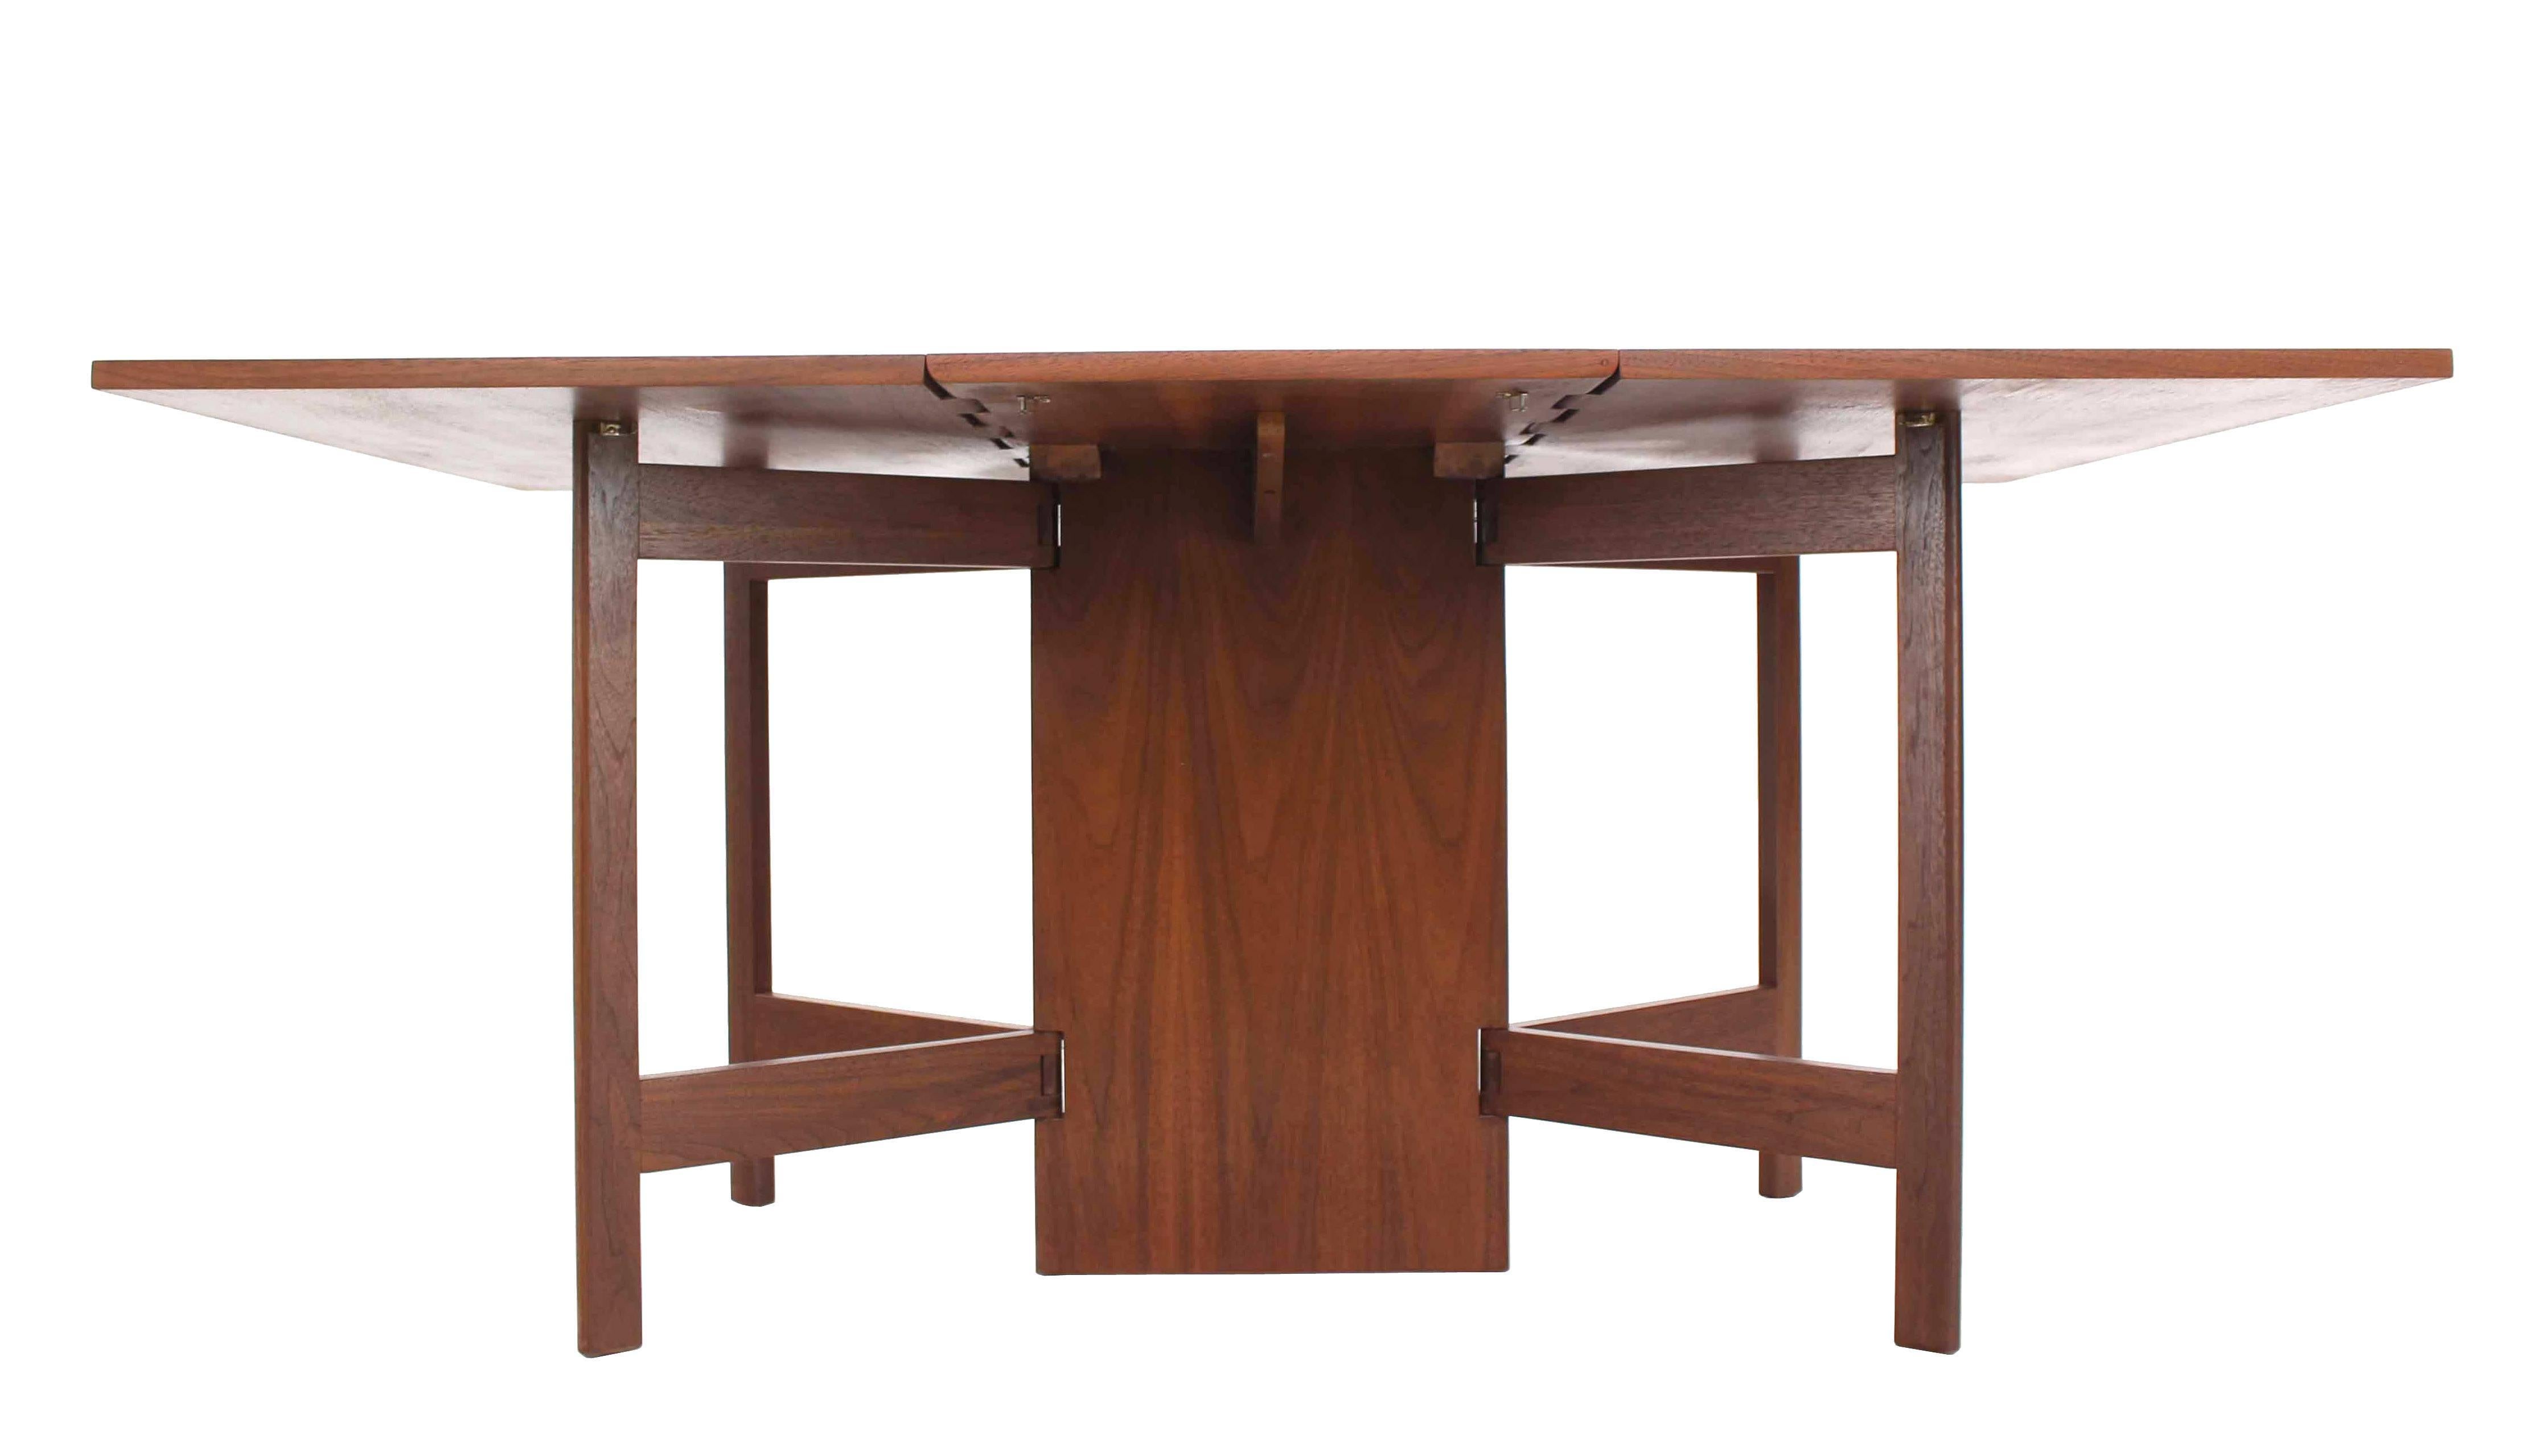 Very nice Mid-Century Modern George Nelson drop-leaf dining table.